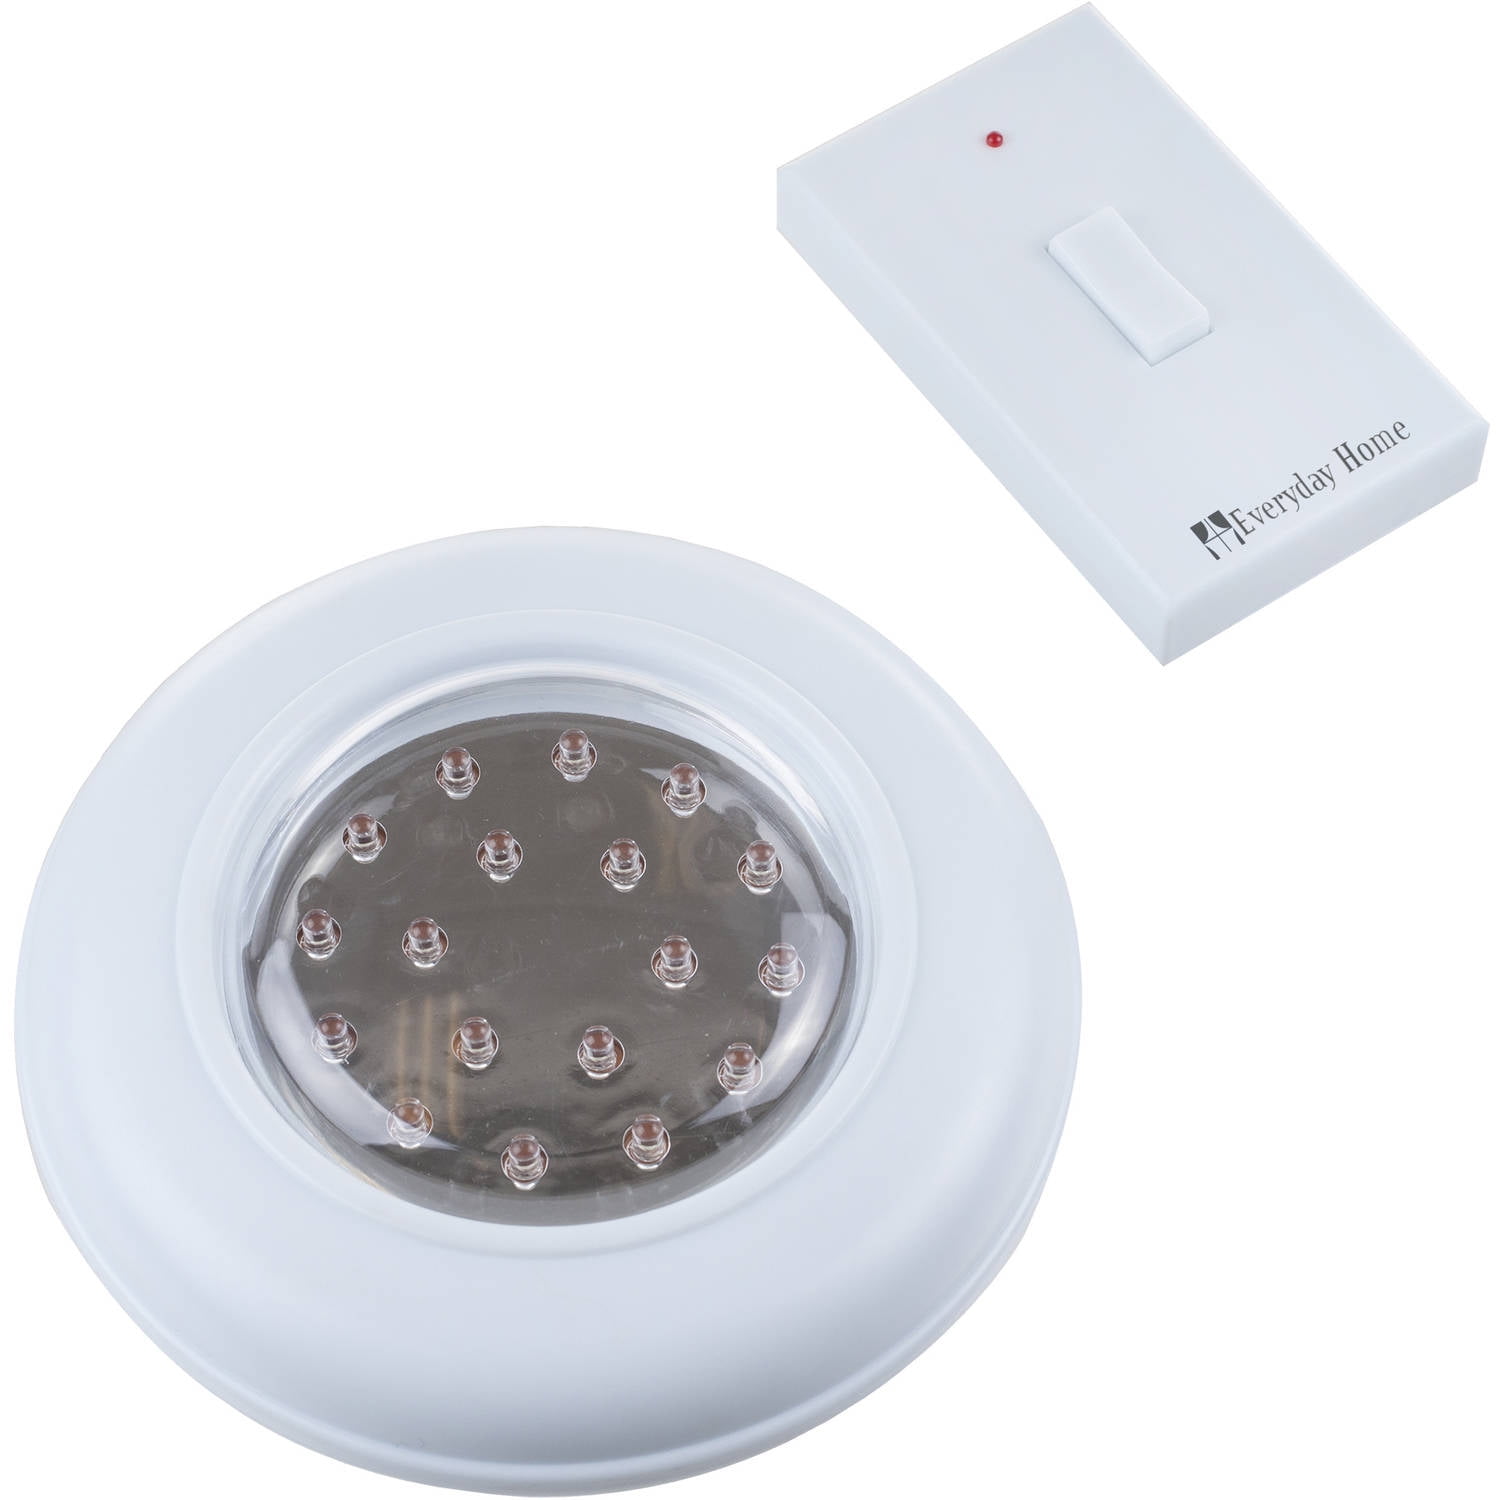 Cordless Ceiling Wall Light With Remote Control Light Switch